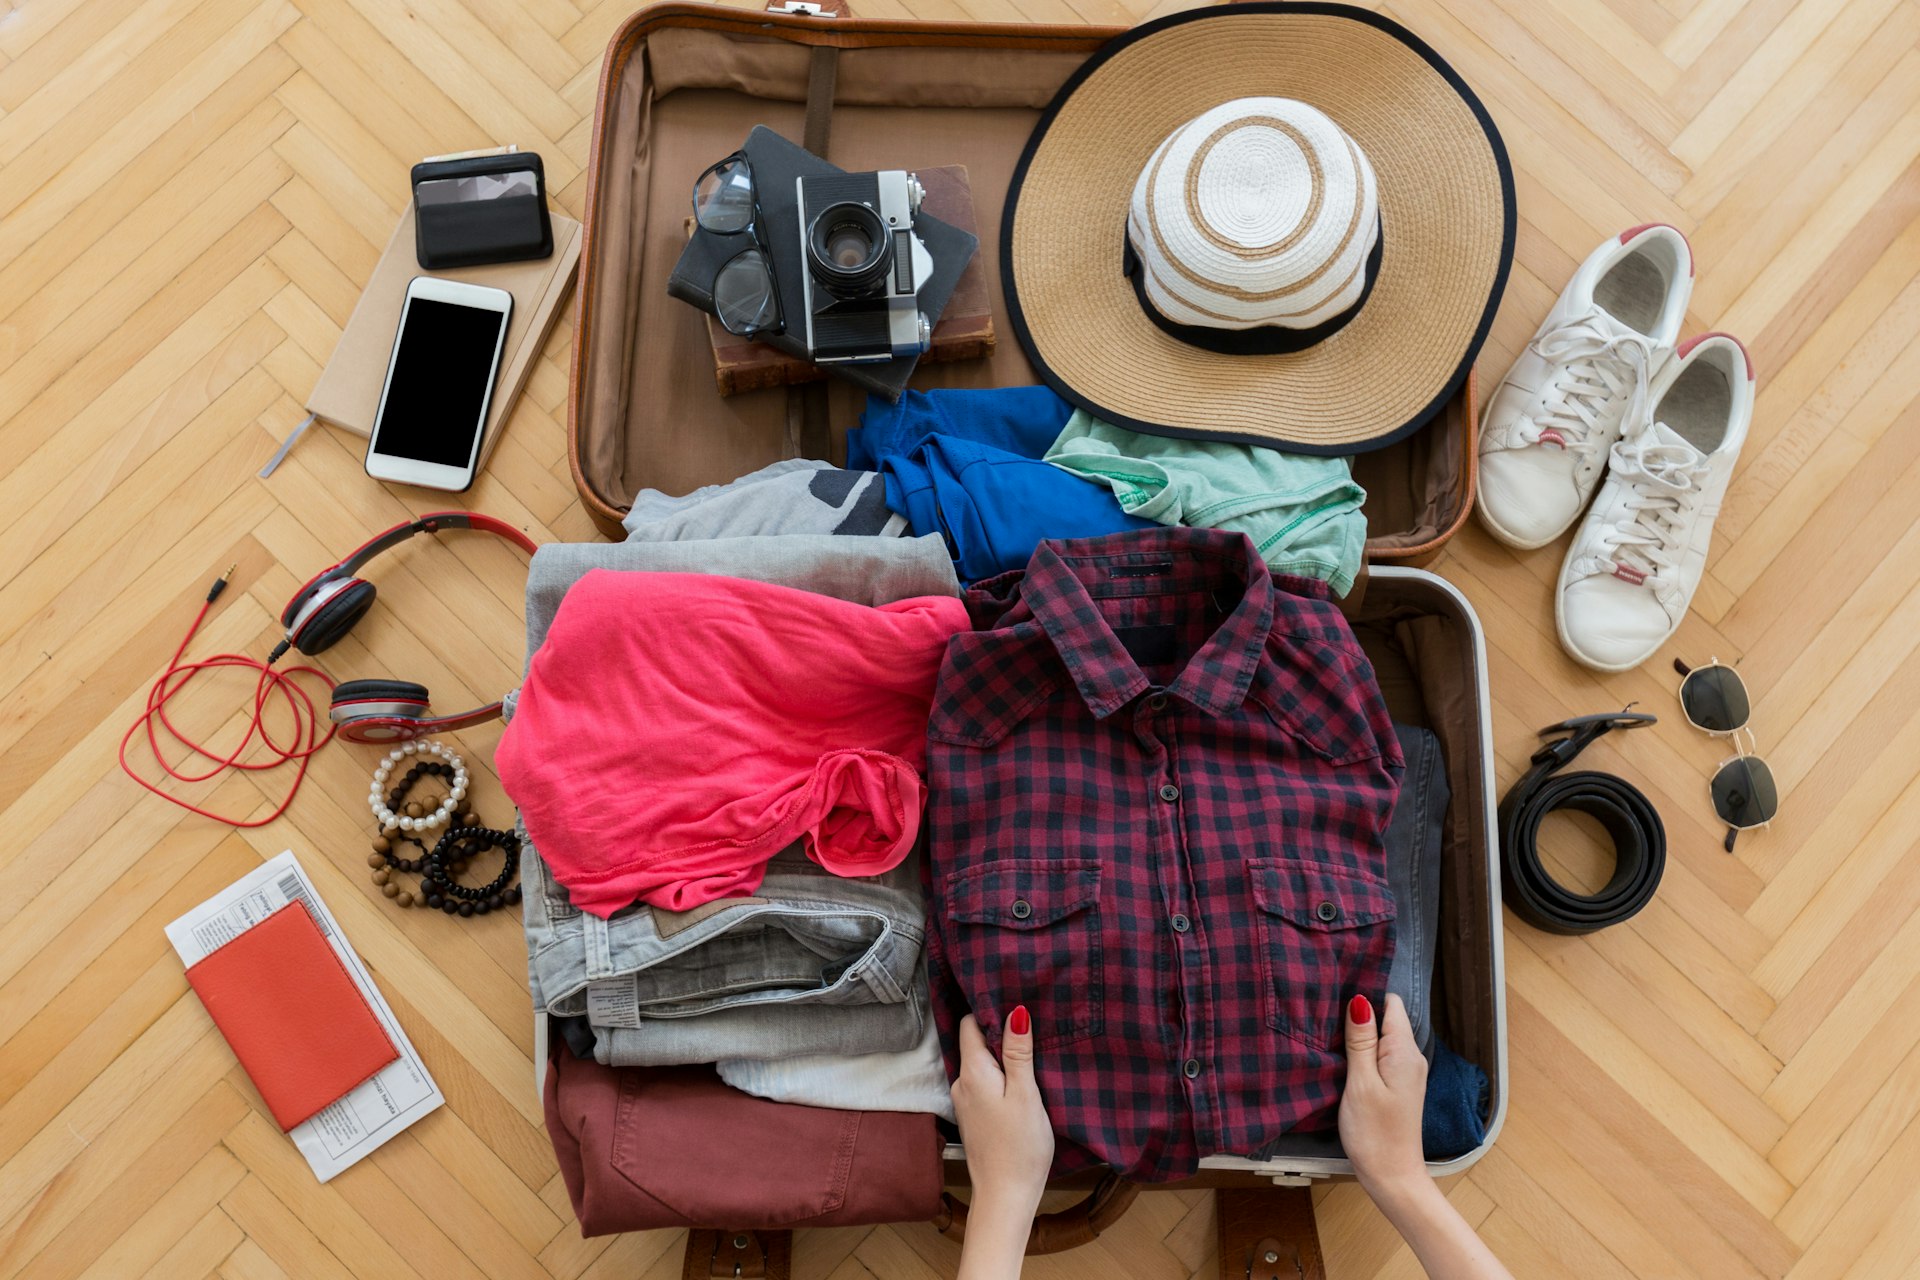 Woman hand preparing summer luggage. A phone, a hat and clothes are in her suitcase.